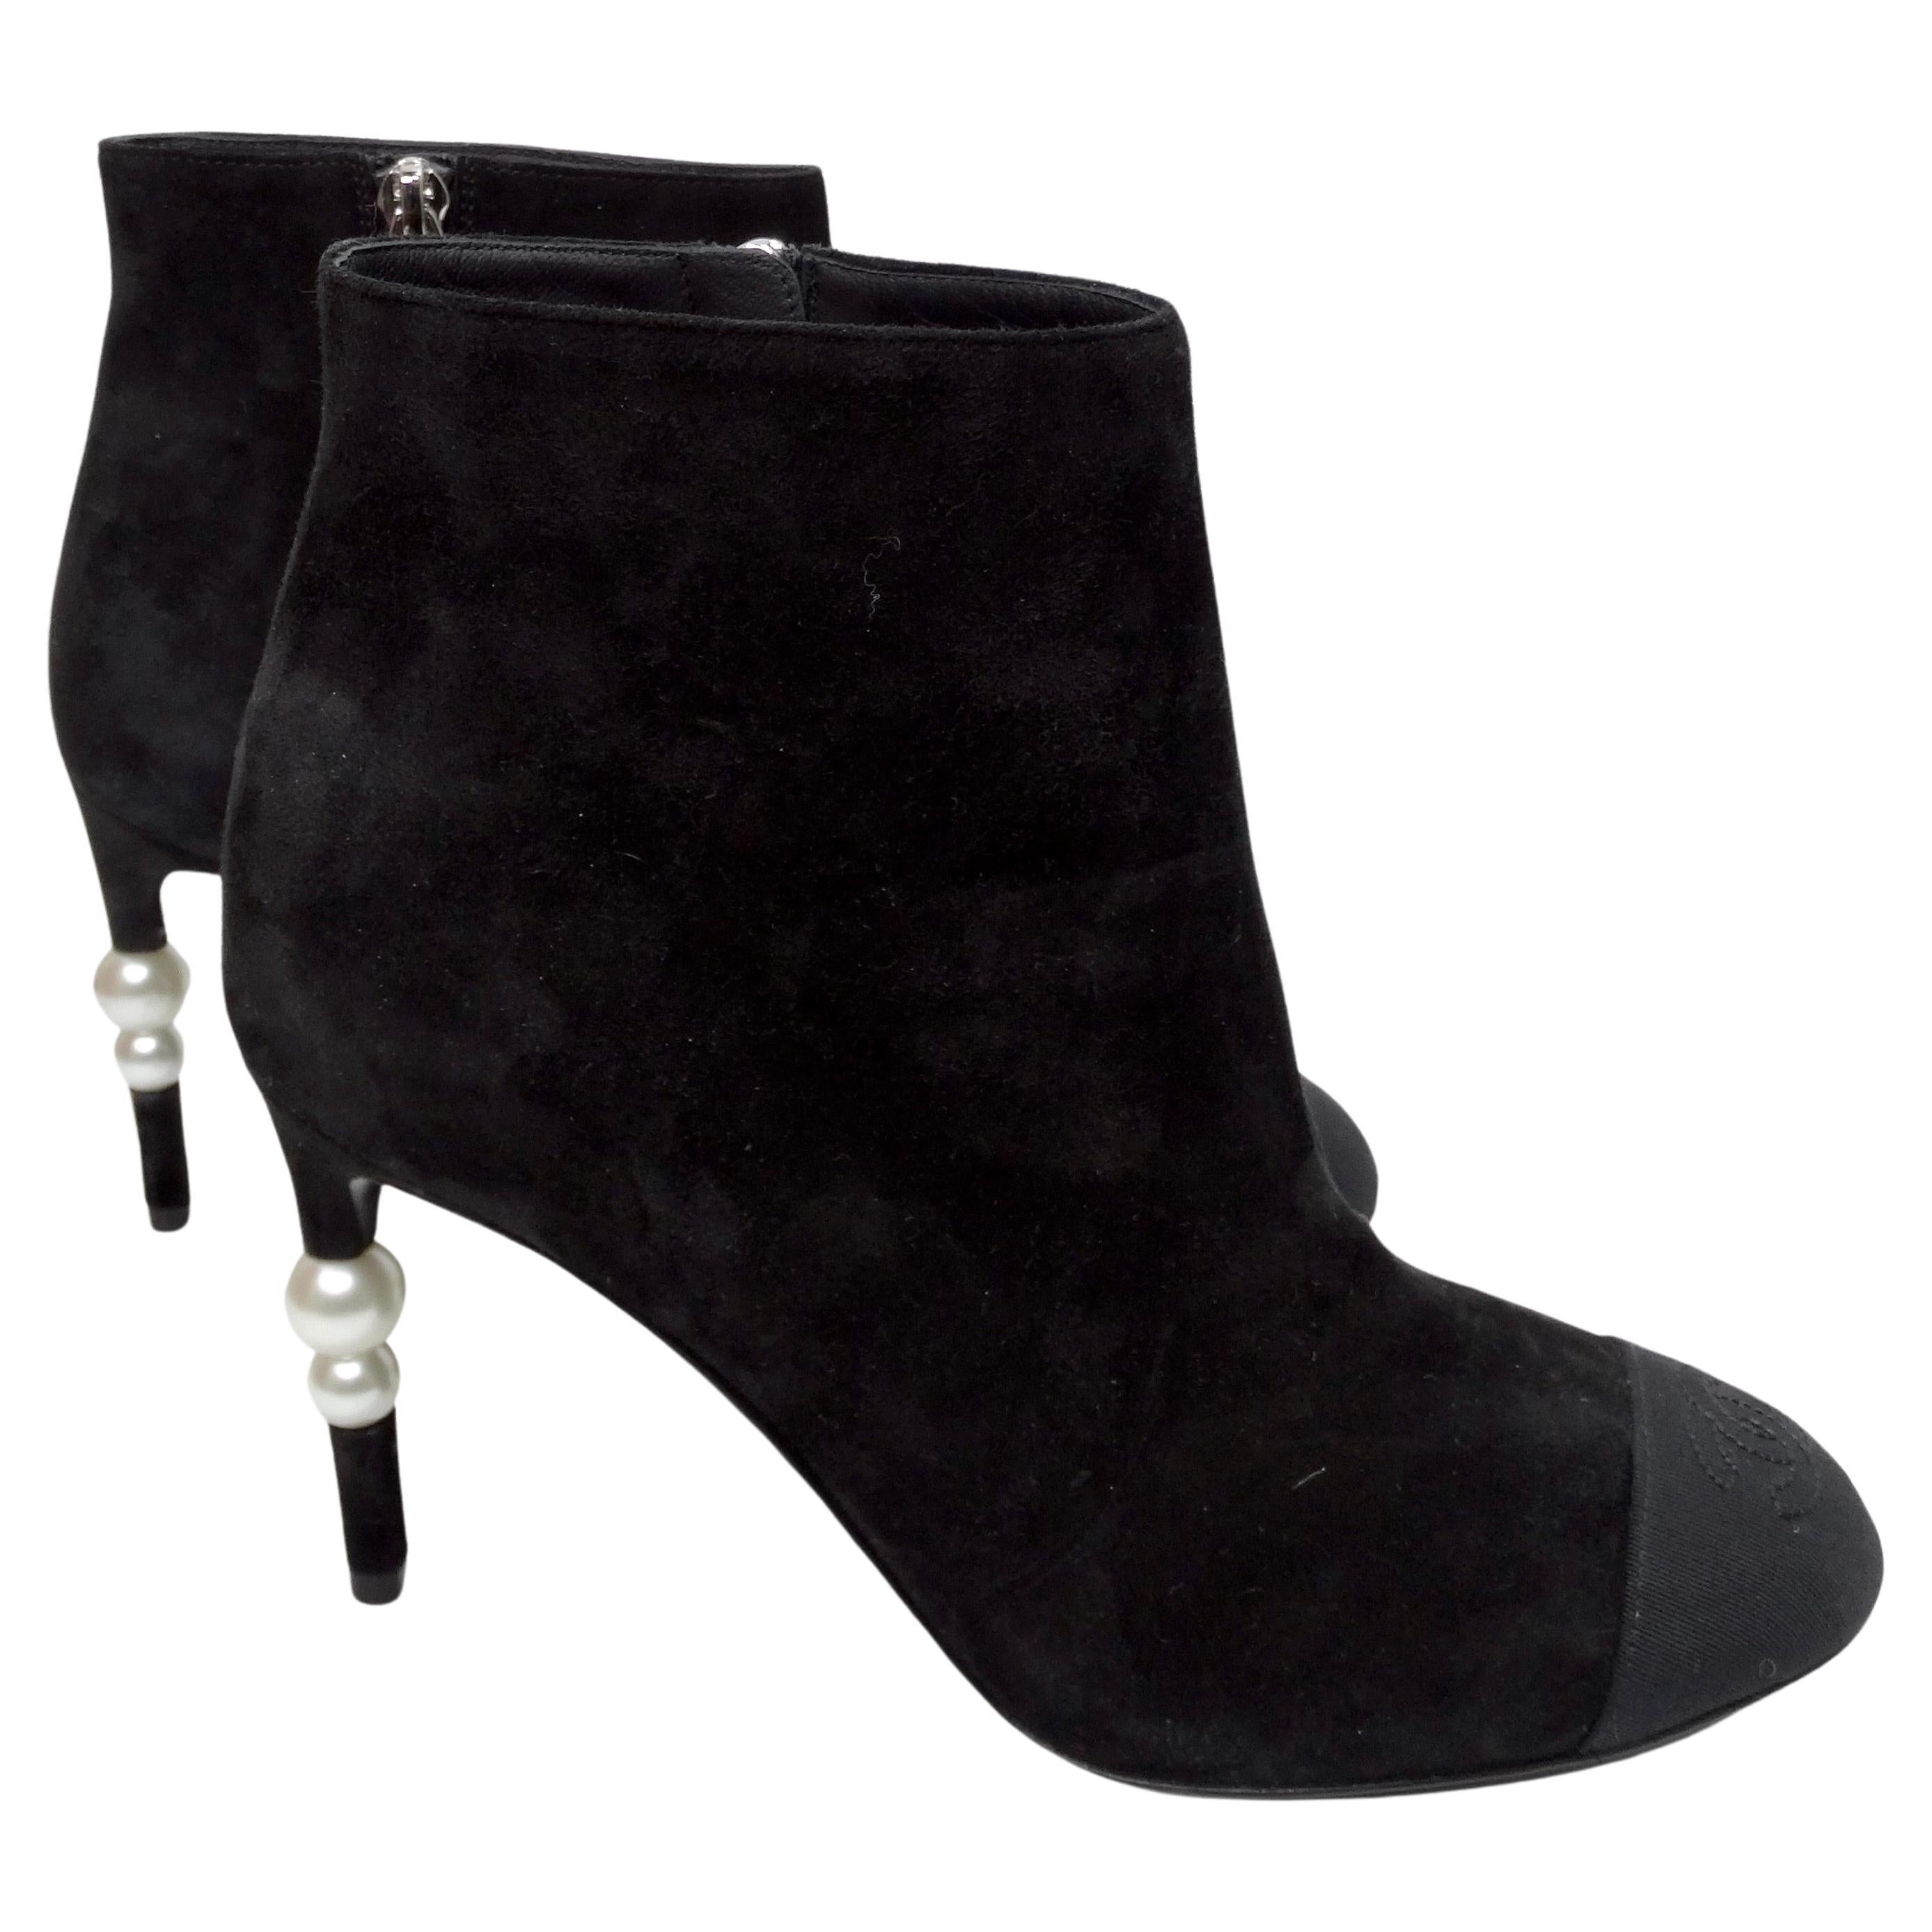 These are iconic and classic pair of booties that need to be in your wardrobe for the fall and winter! You can recycle these every year as the classic color and silhouette will never fail you. Everyone will be jealous of these rare and unique pair